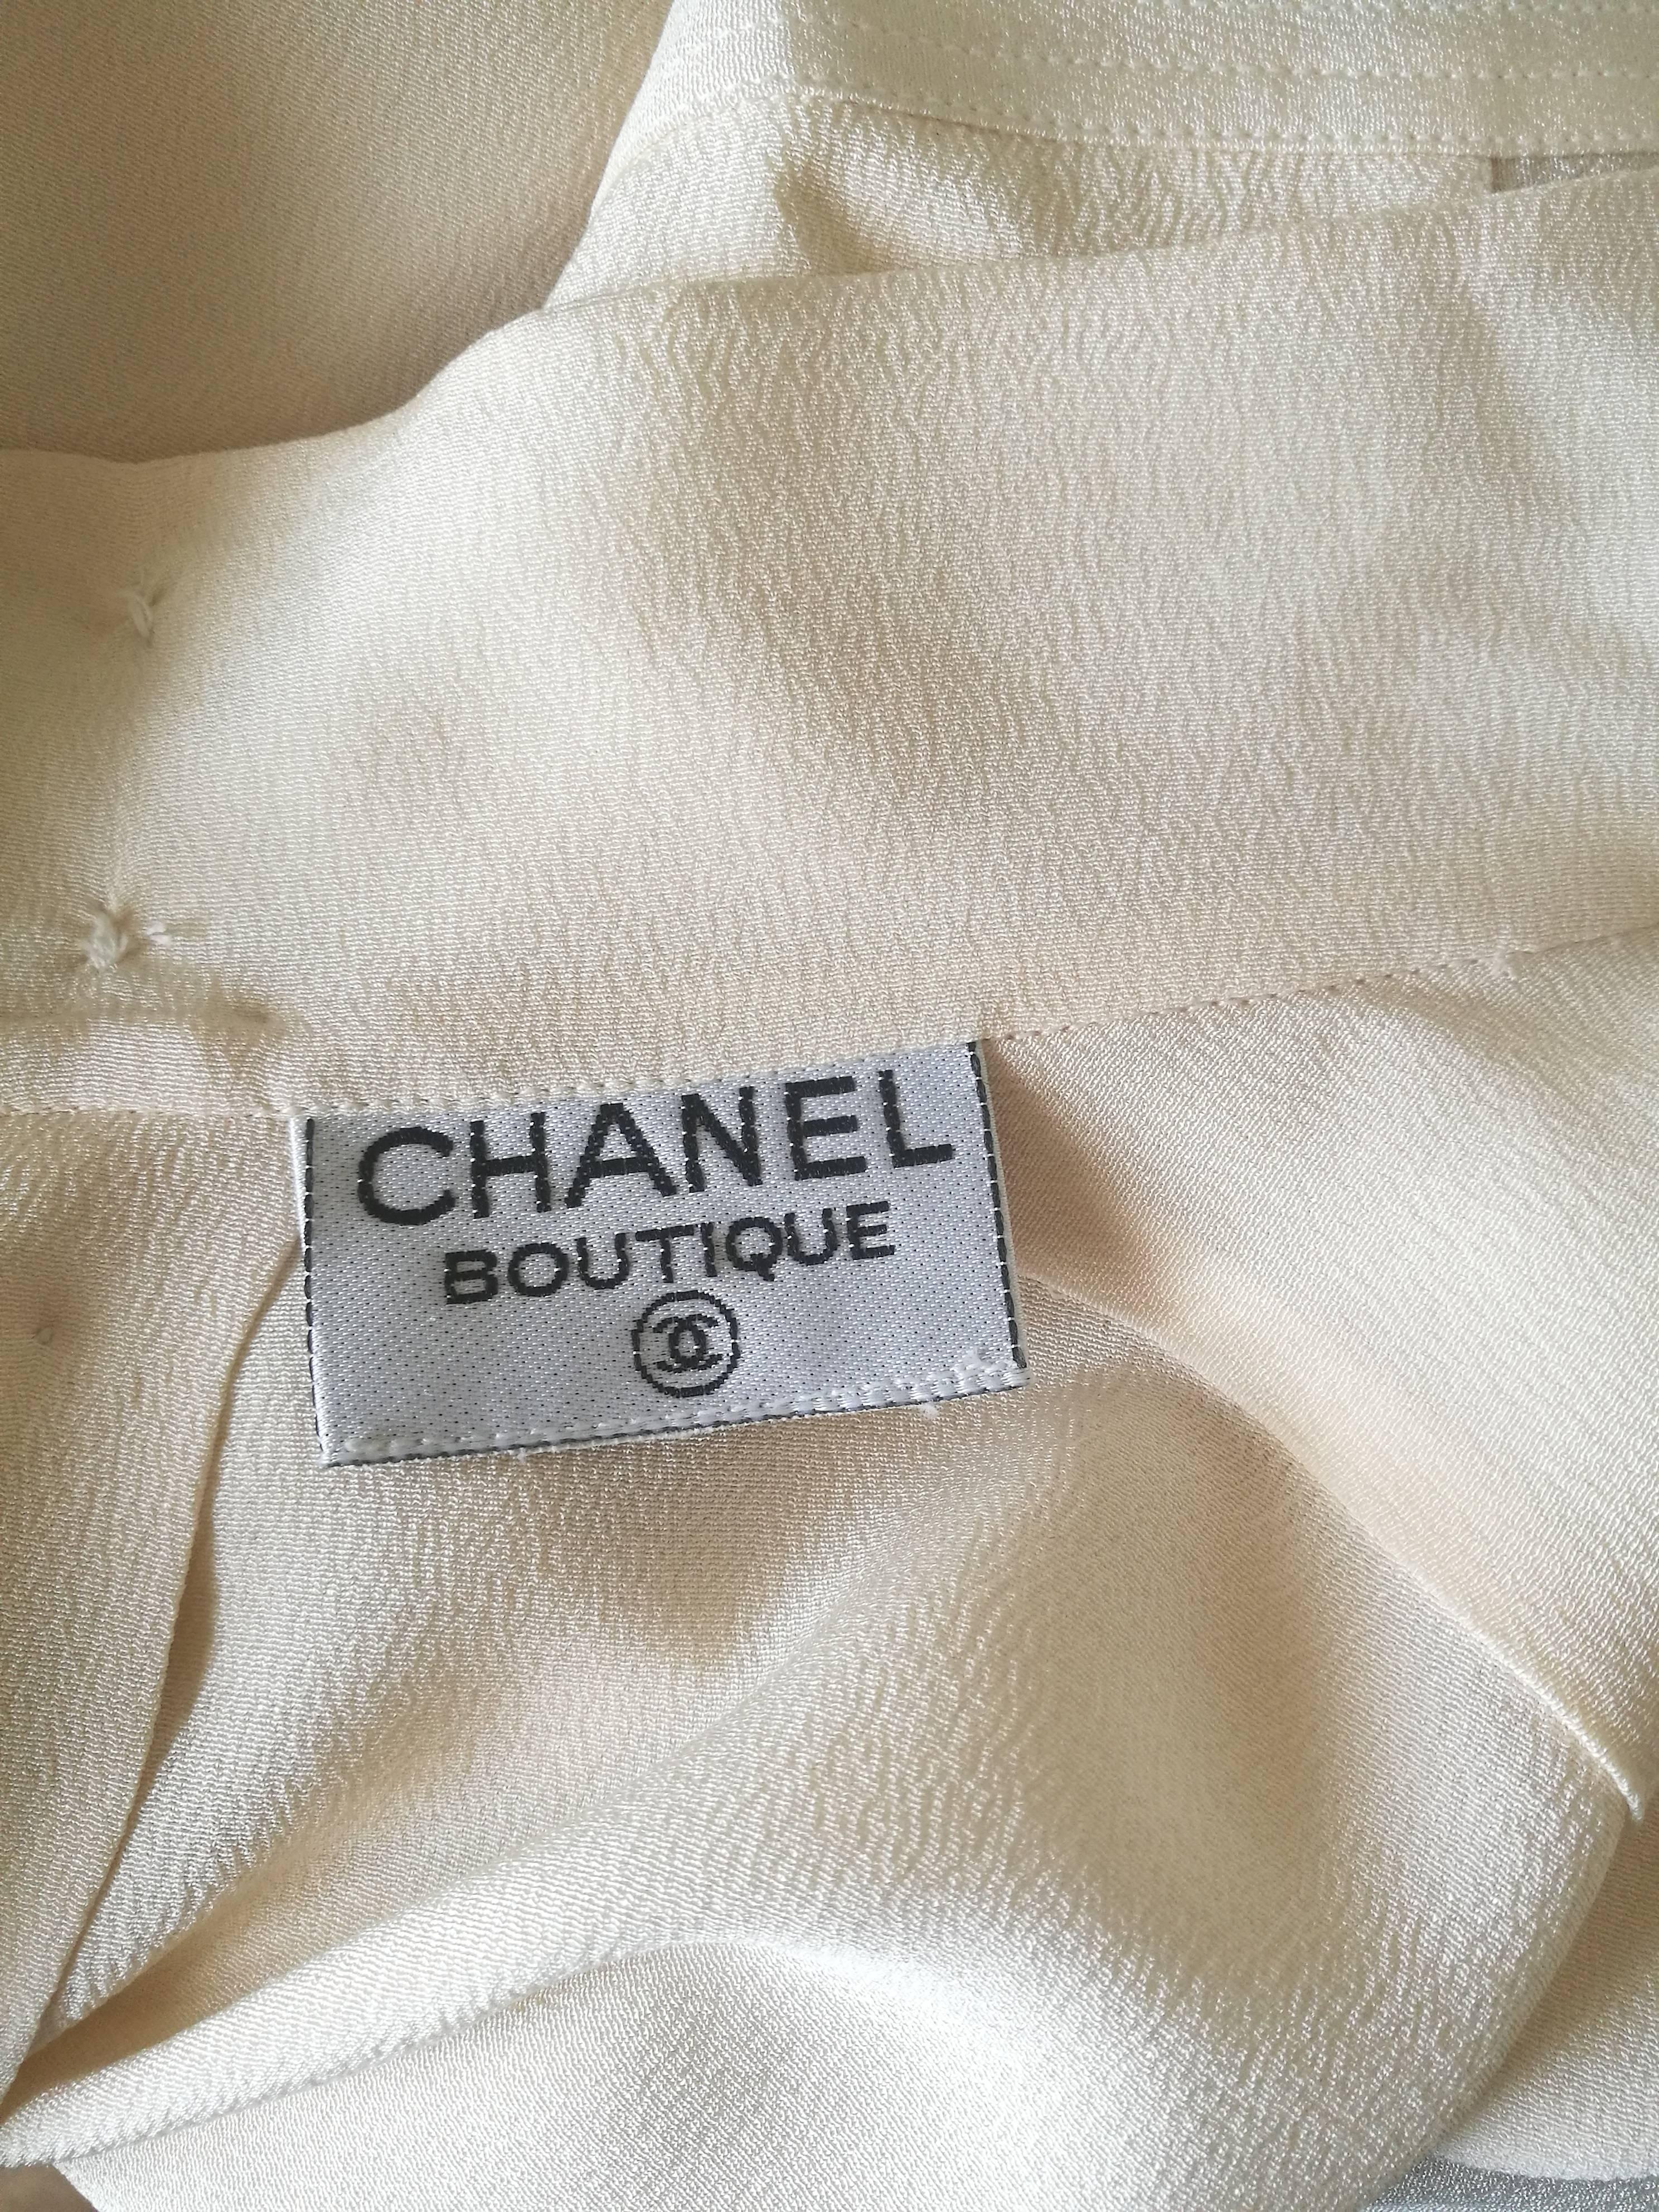 Chanel Boutique Off-White Embellished Gold Tone bottons Shirt 5